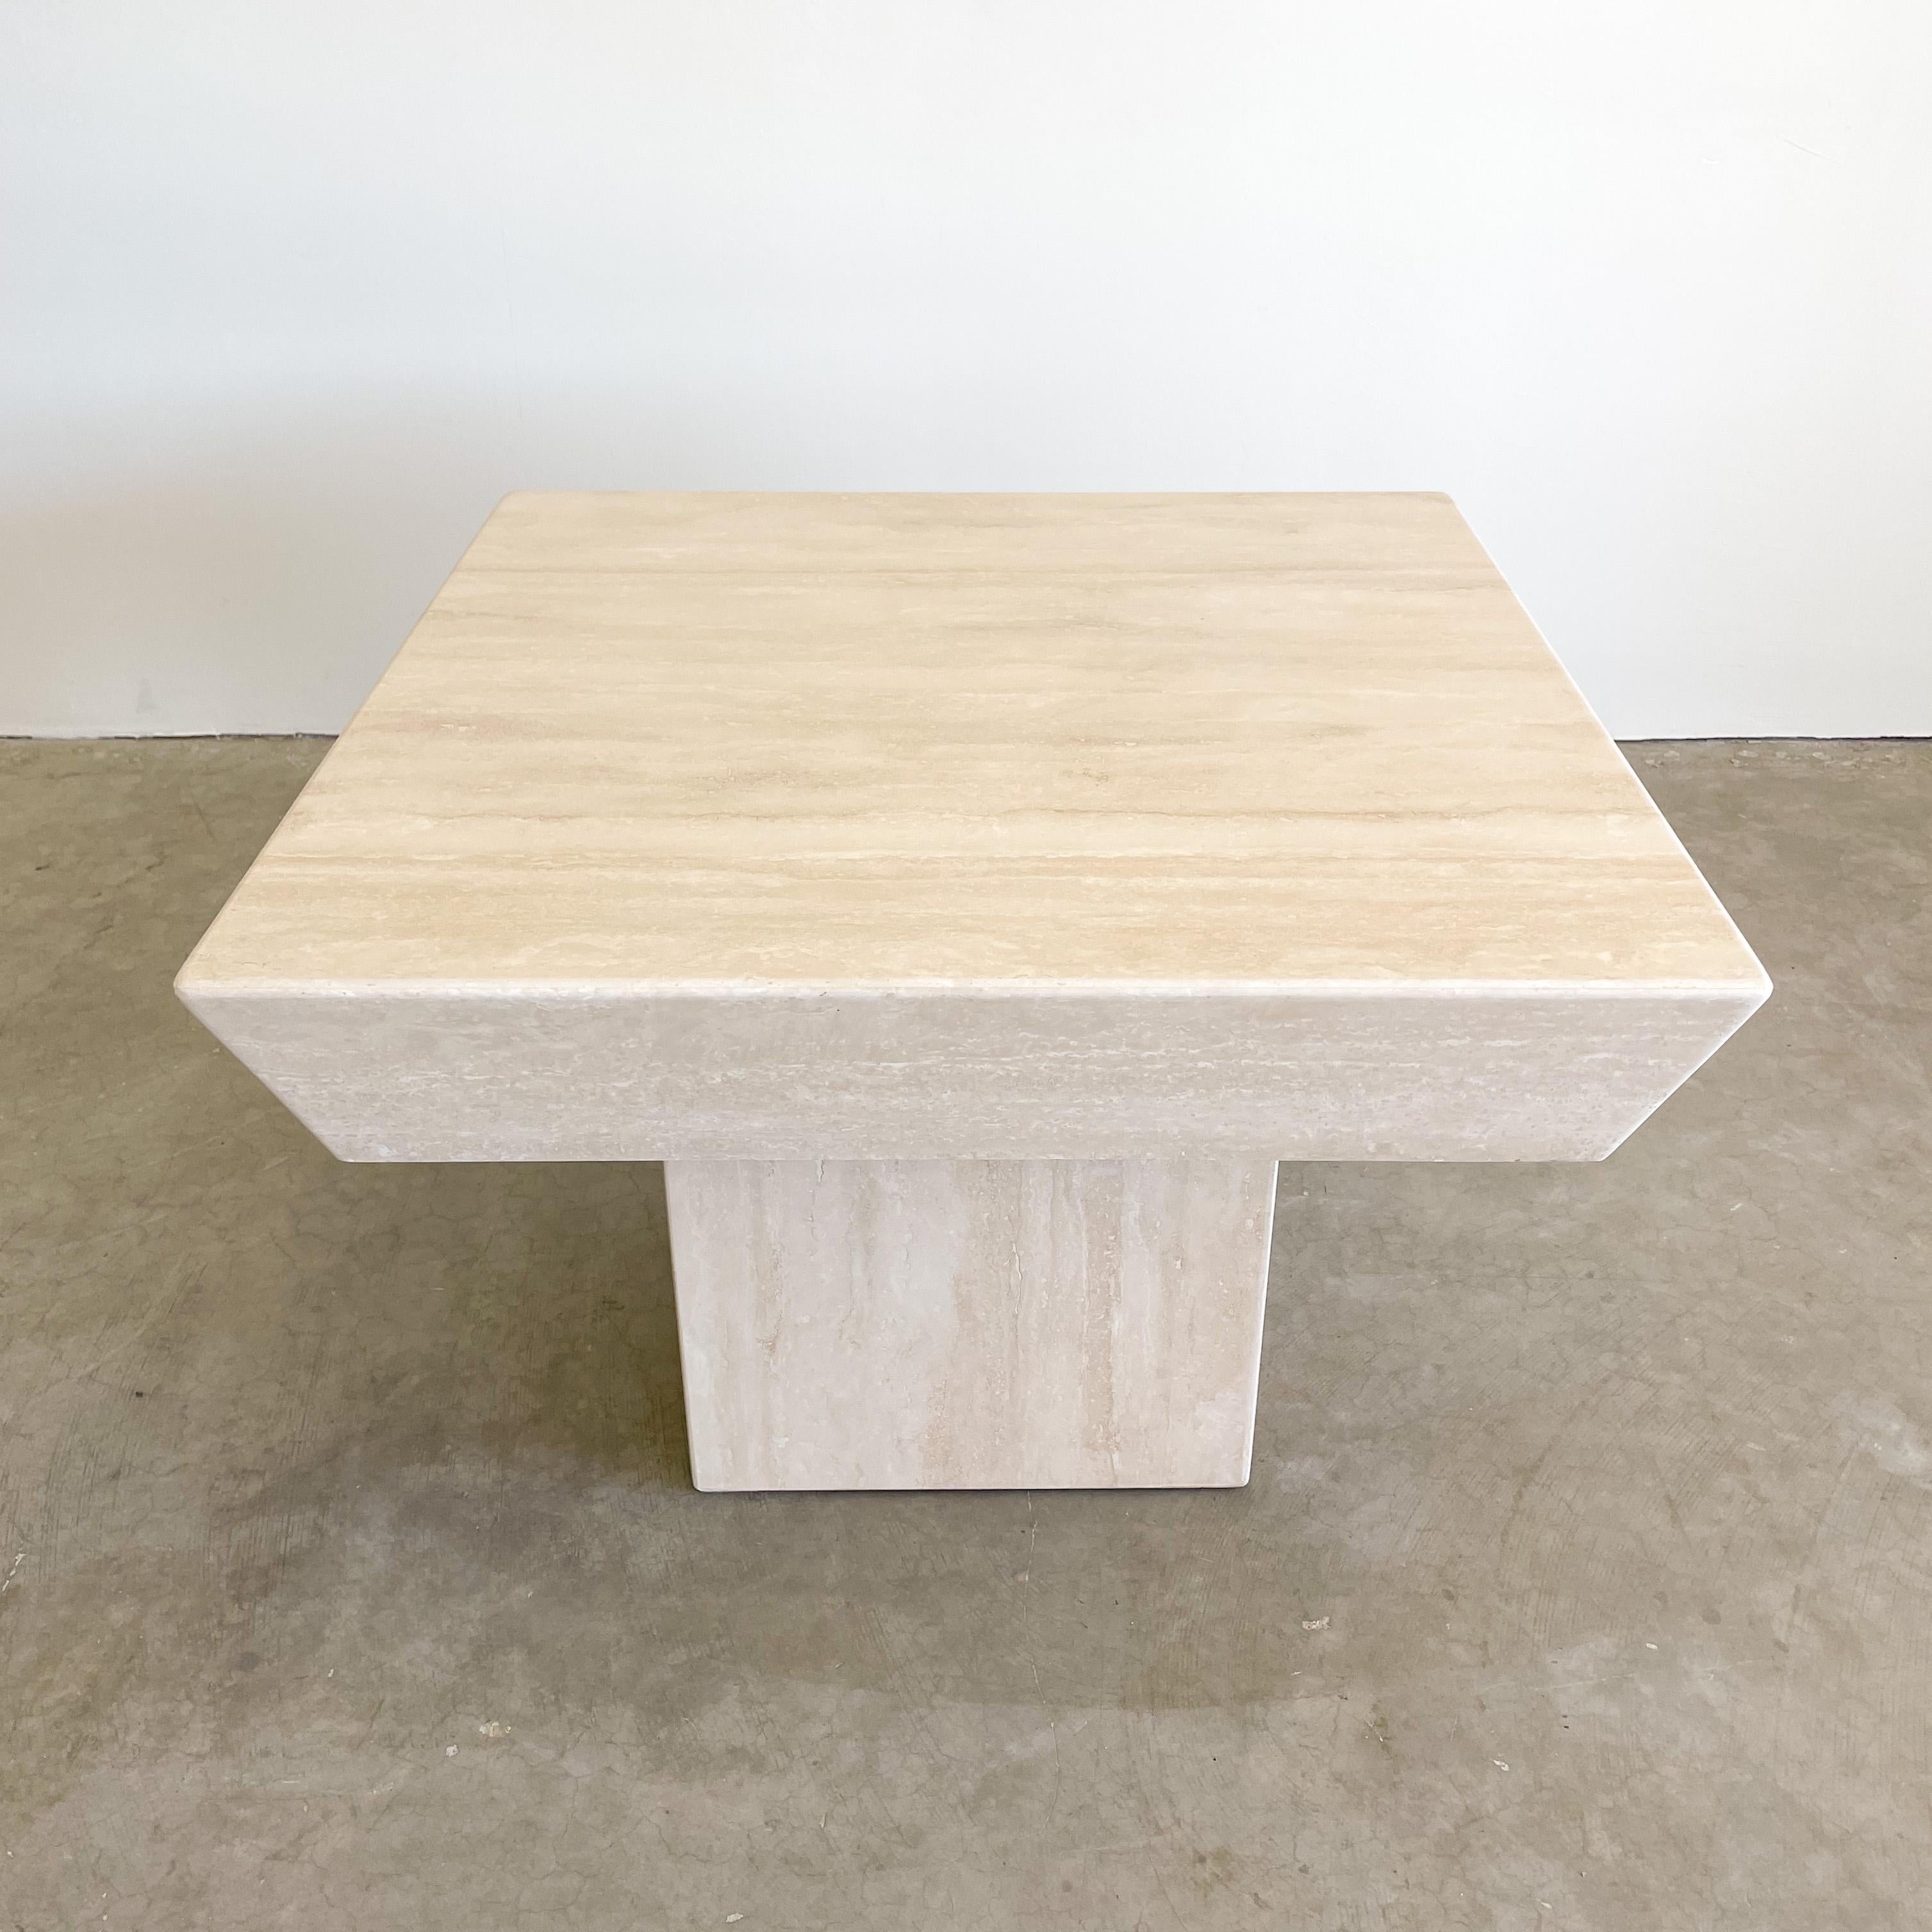 Vintage Square Travertine Stone End Table Marble Postmodern MCM Retro Minimal In Good Condition For Sale In Palm Desert, CA